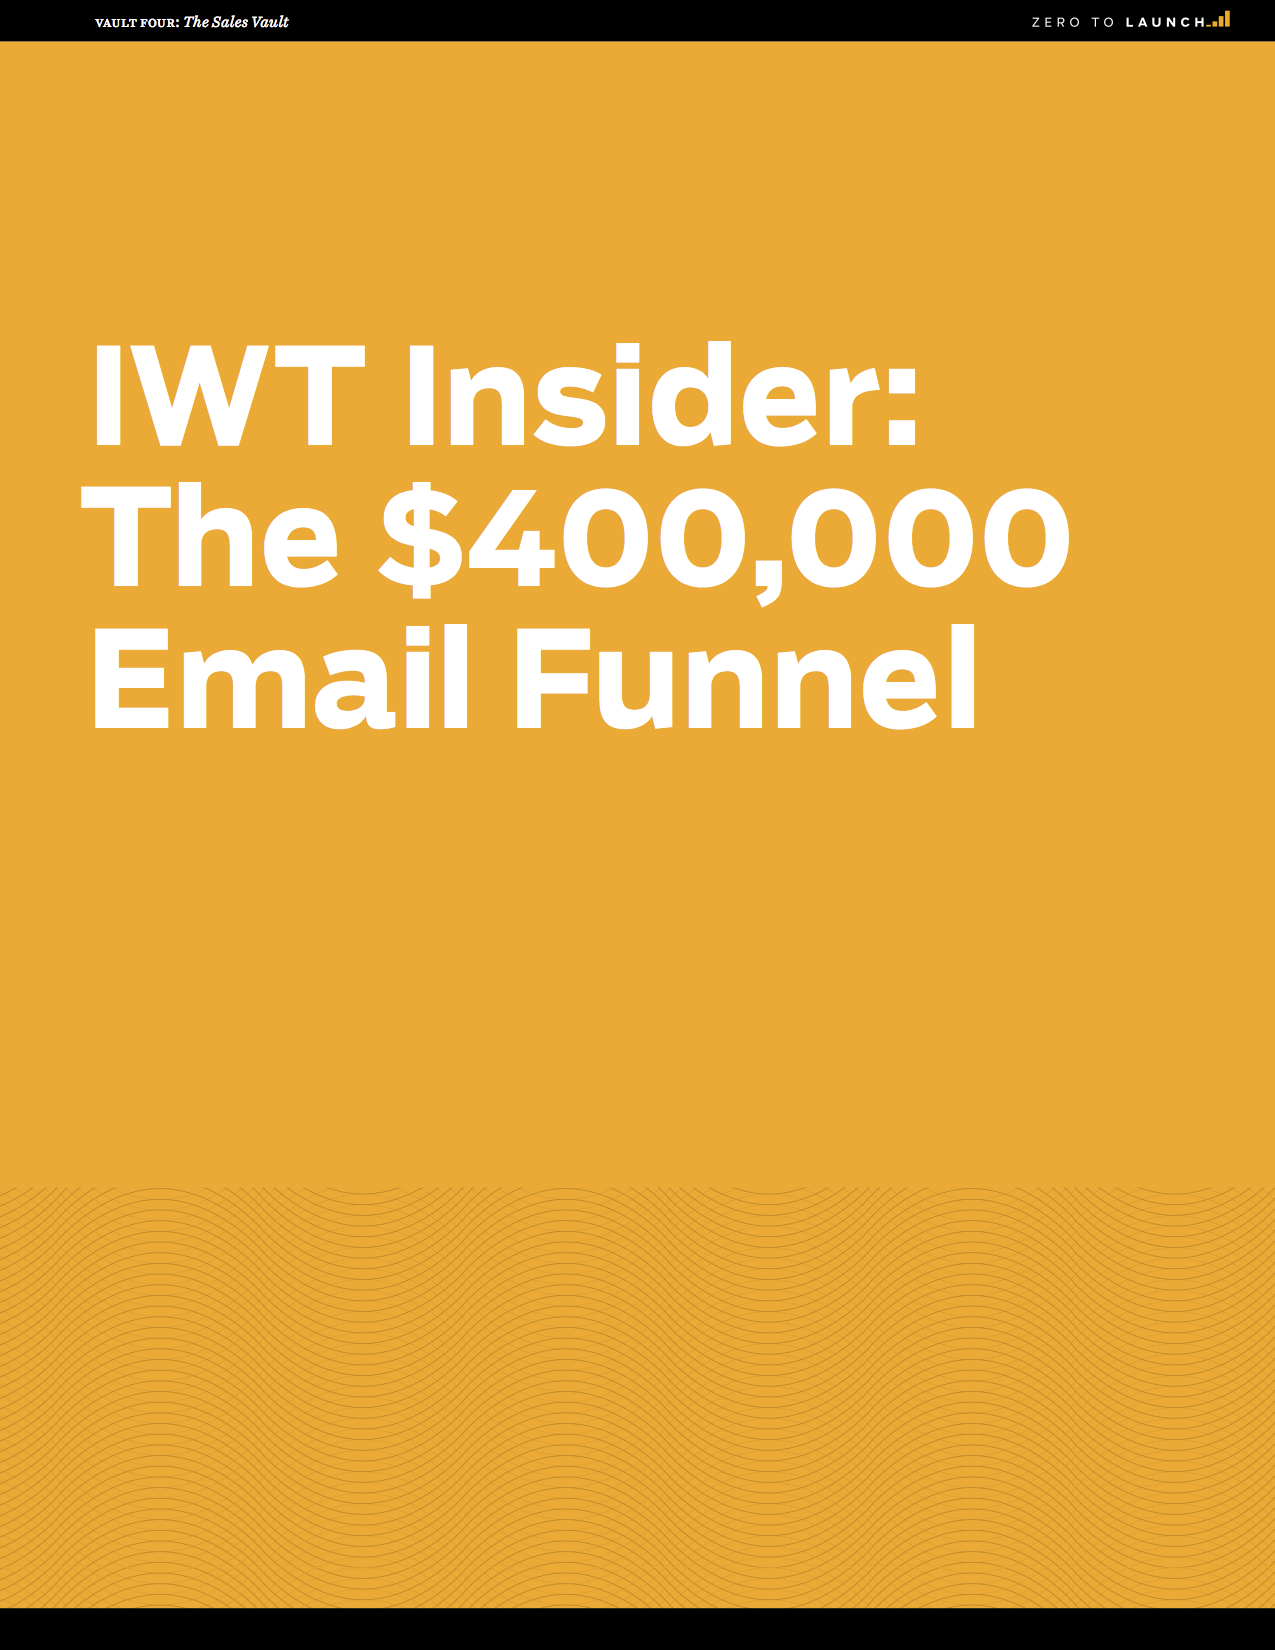 Download the free report: 'IWT Insider: the $400,000 Email Funnel' and apply the lessons to get higher sales in your next launch.